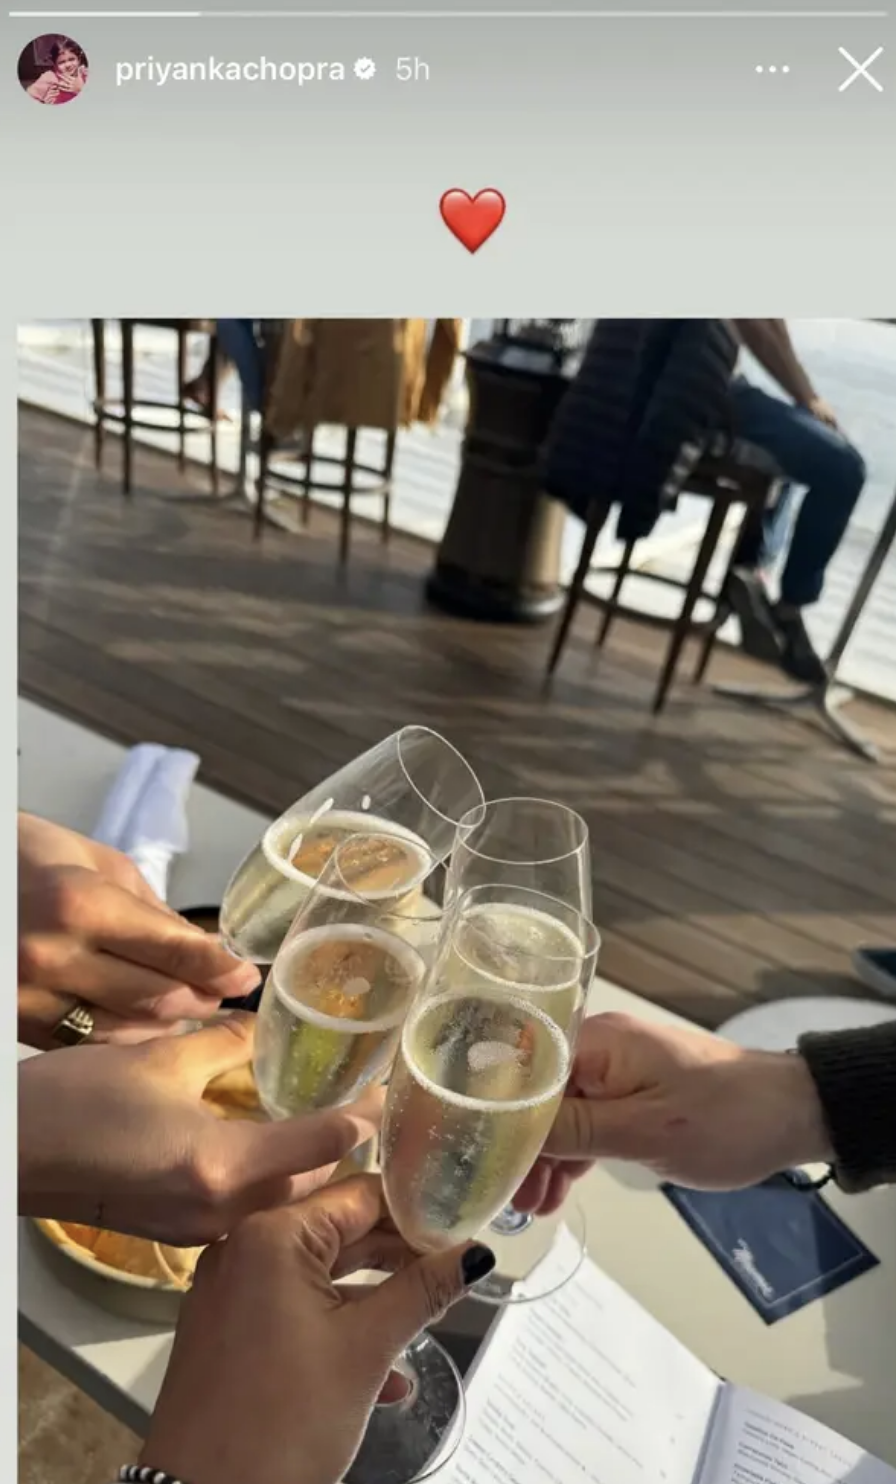 Three people toasting with champagne flutes over a wooden table with a blurred background